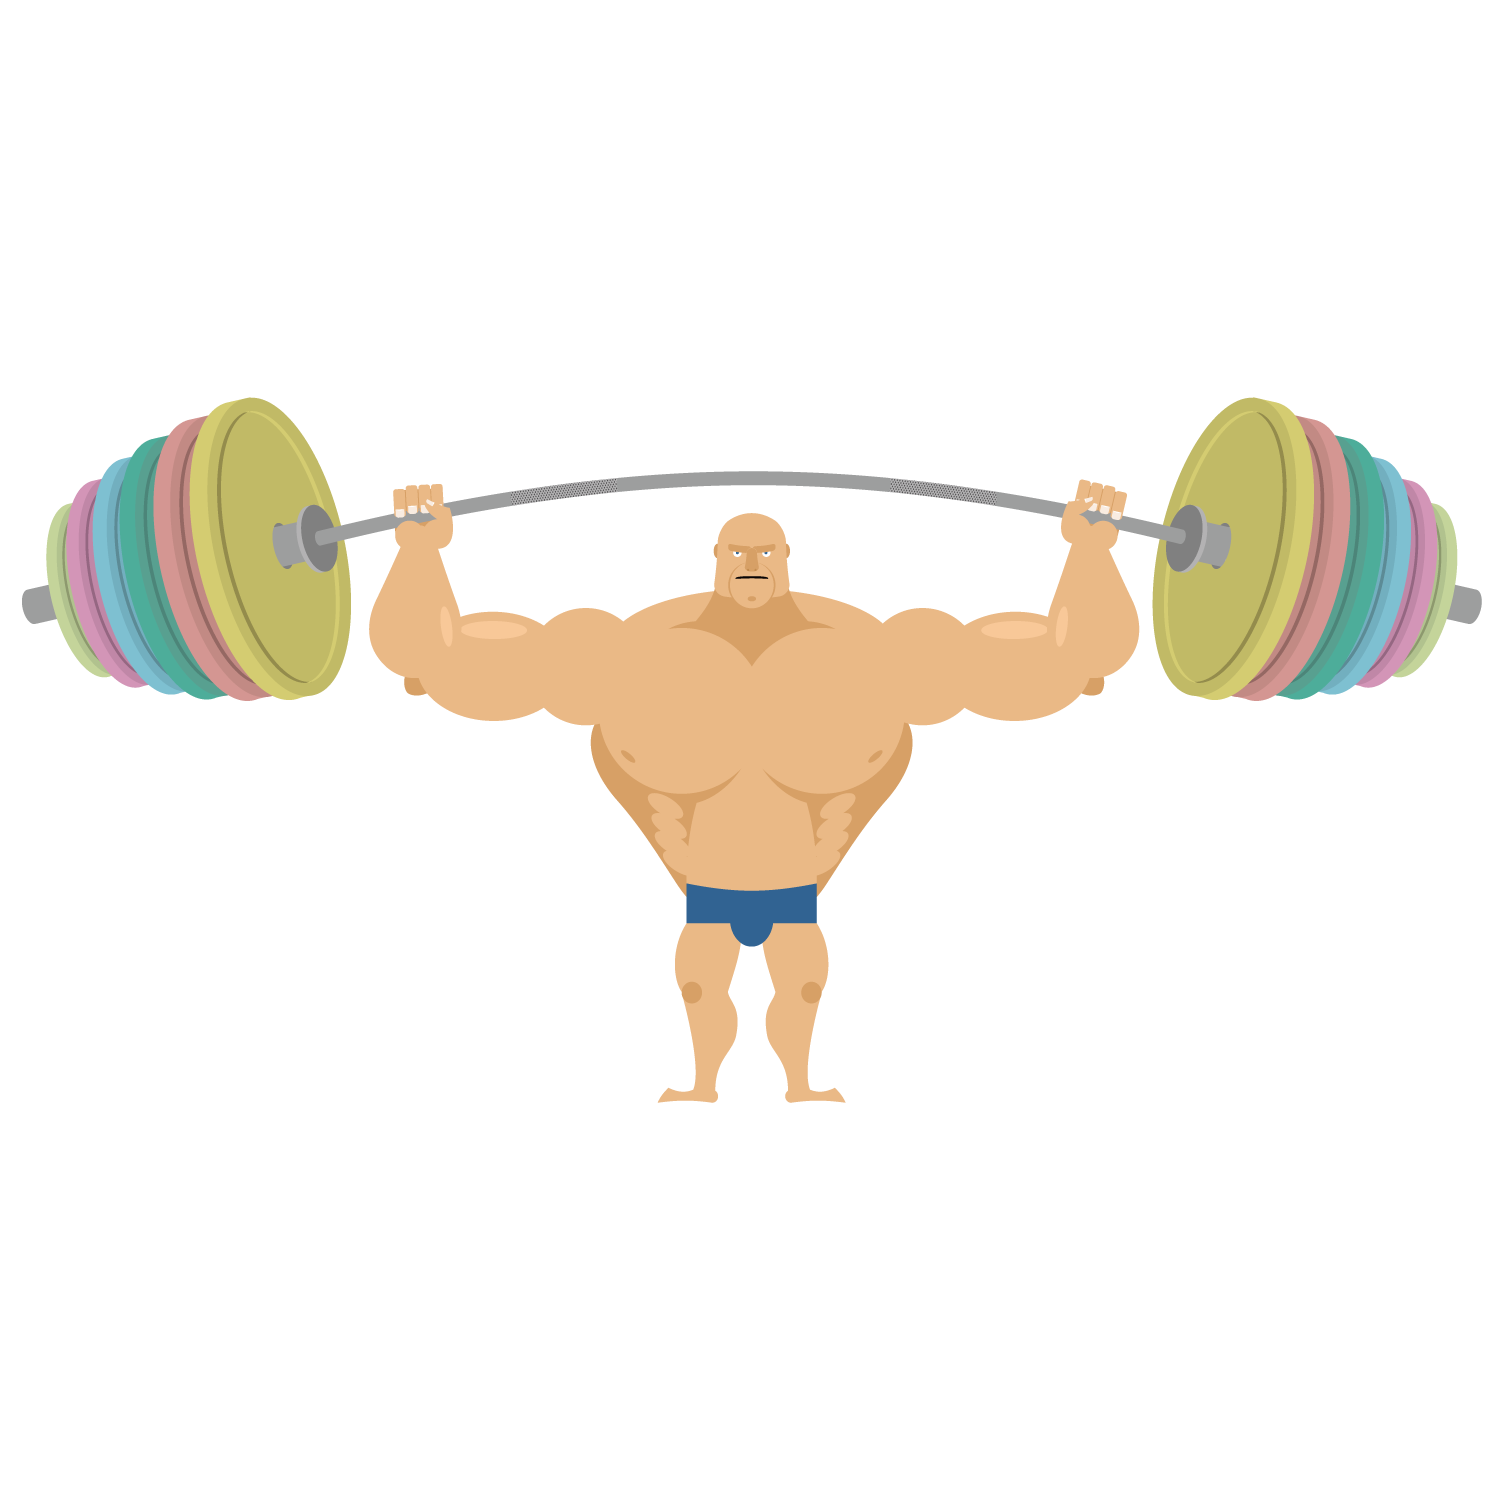 Fitness clipart weight lifting. Barbell saint patricks day